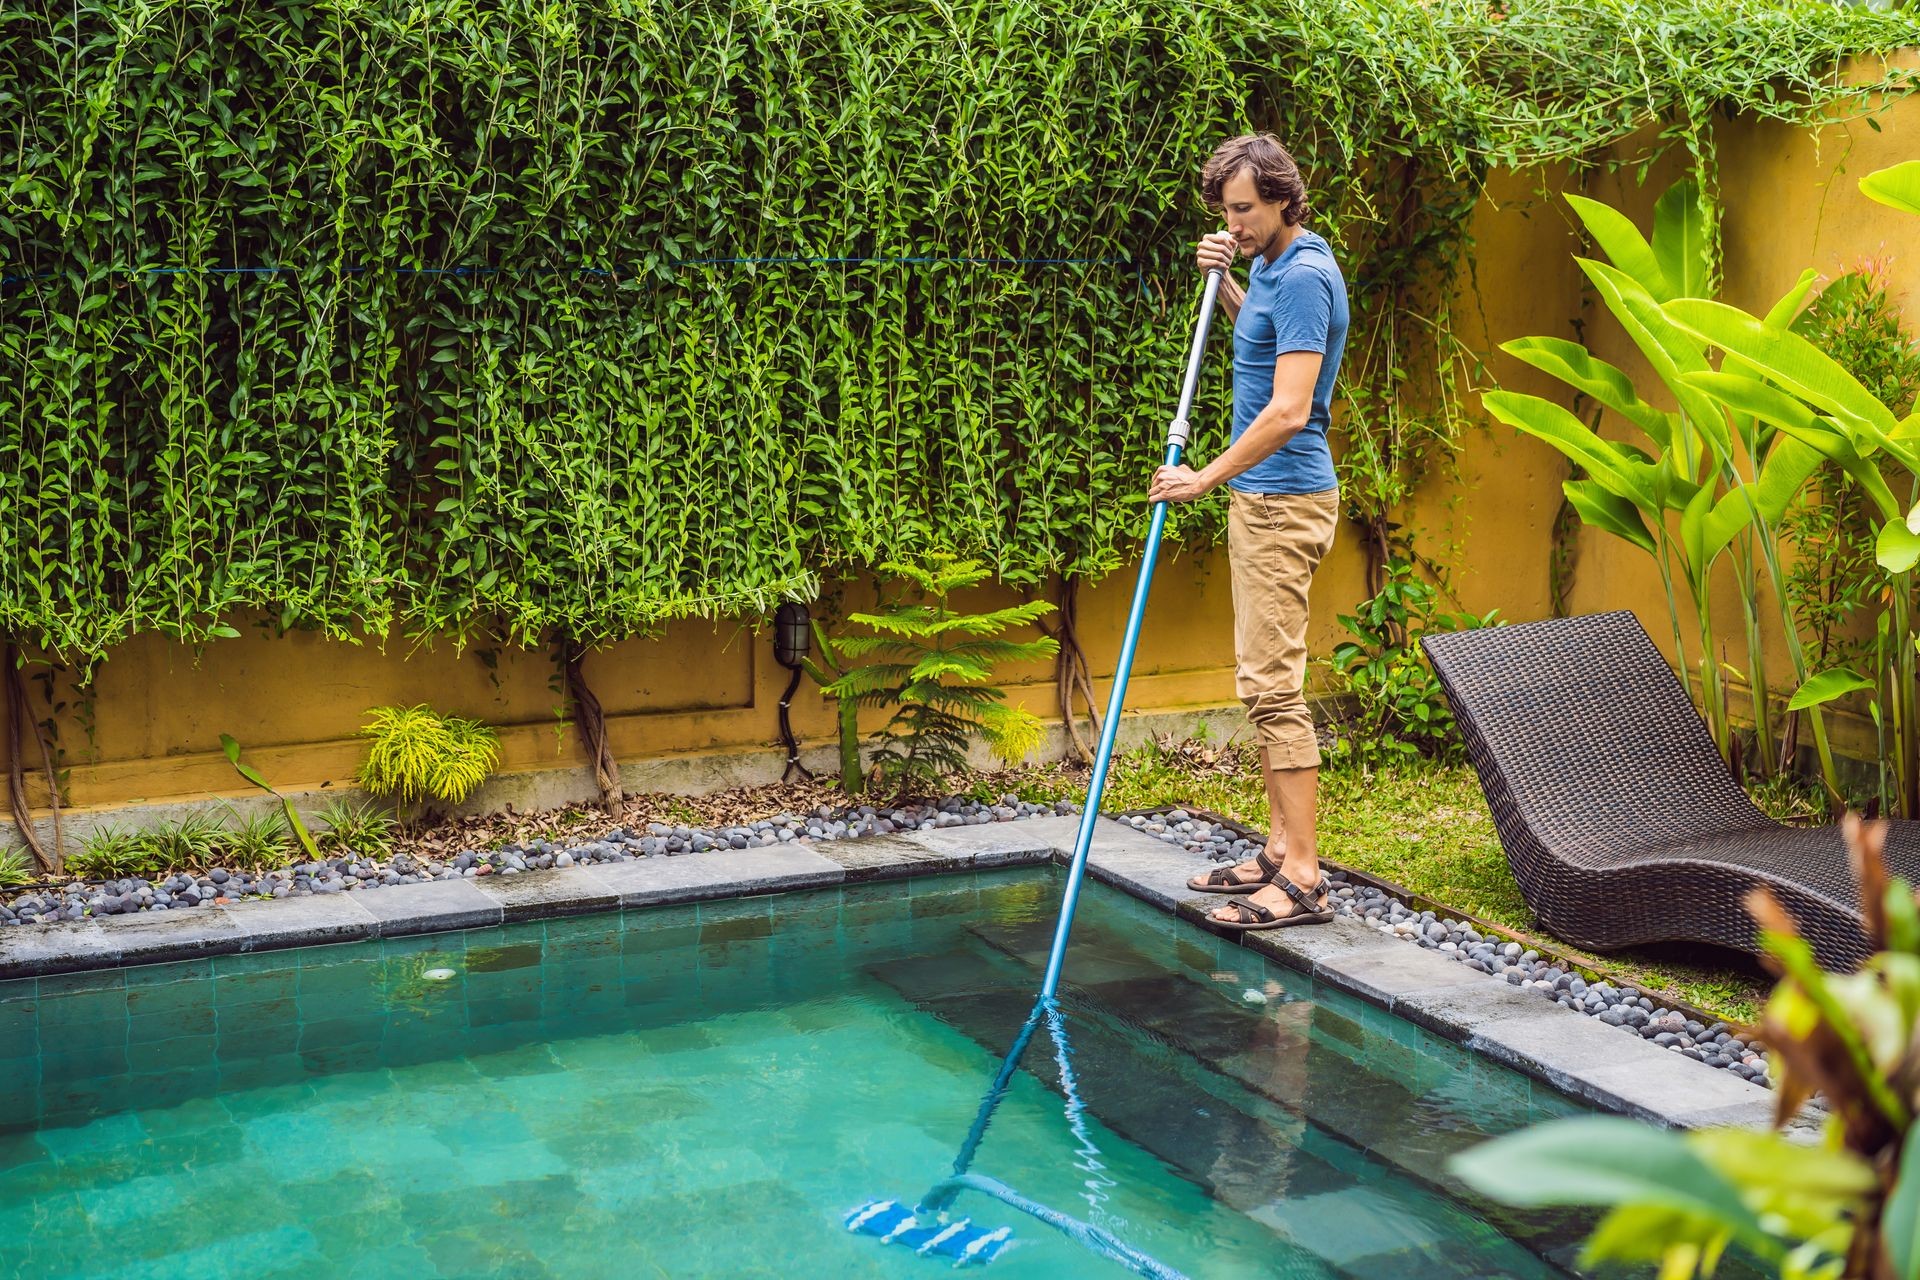 Cleaner of the swimming pool . Man in a blue shirt with cleaning equipment for swimming pools. Pool cleaning services